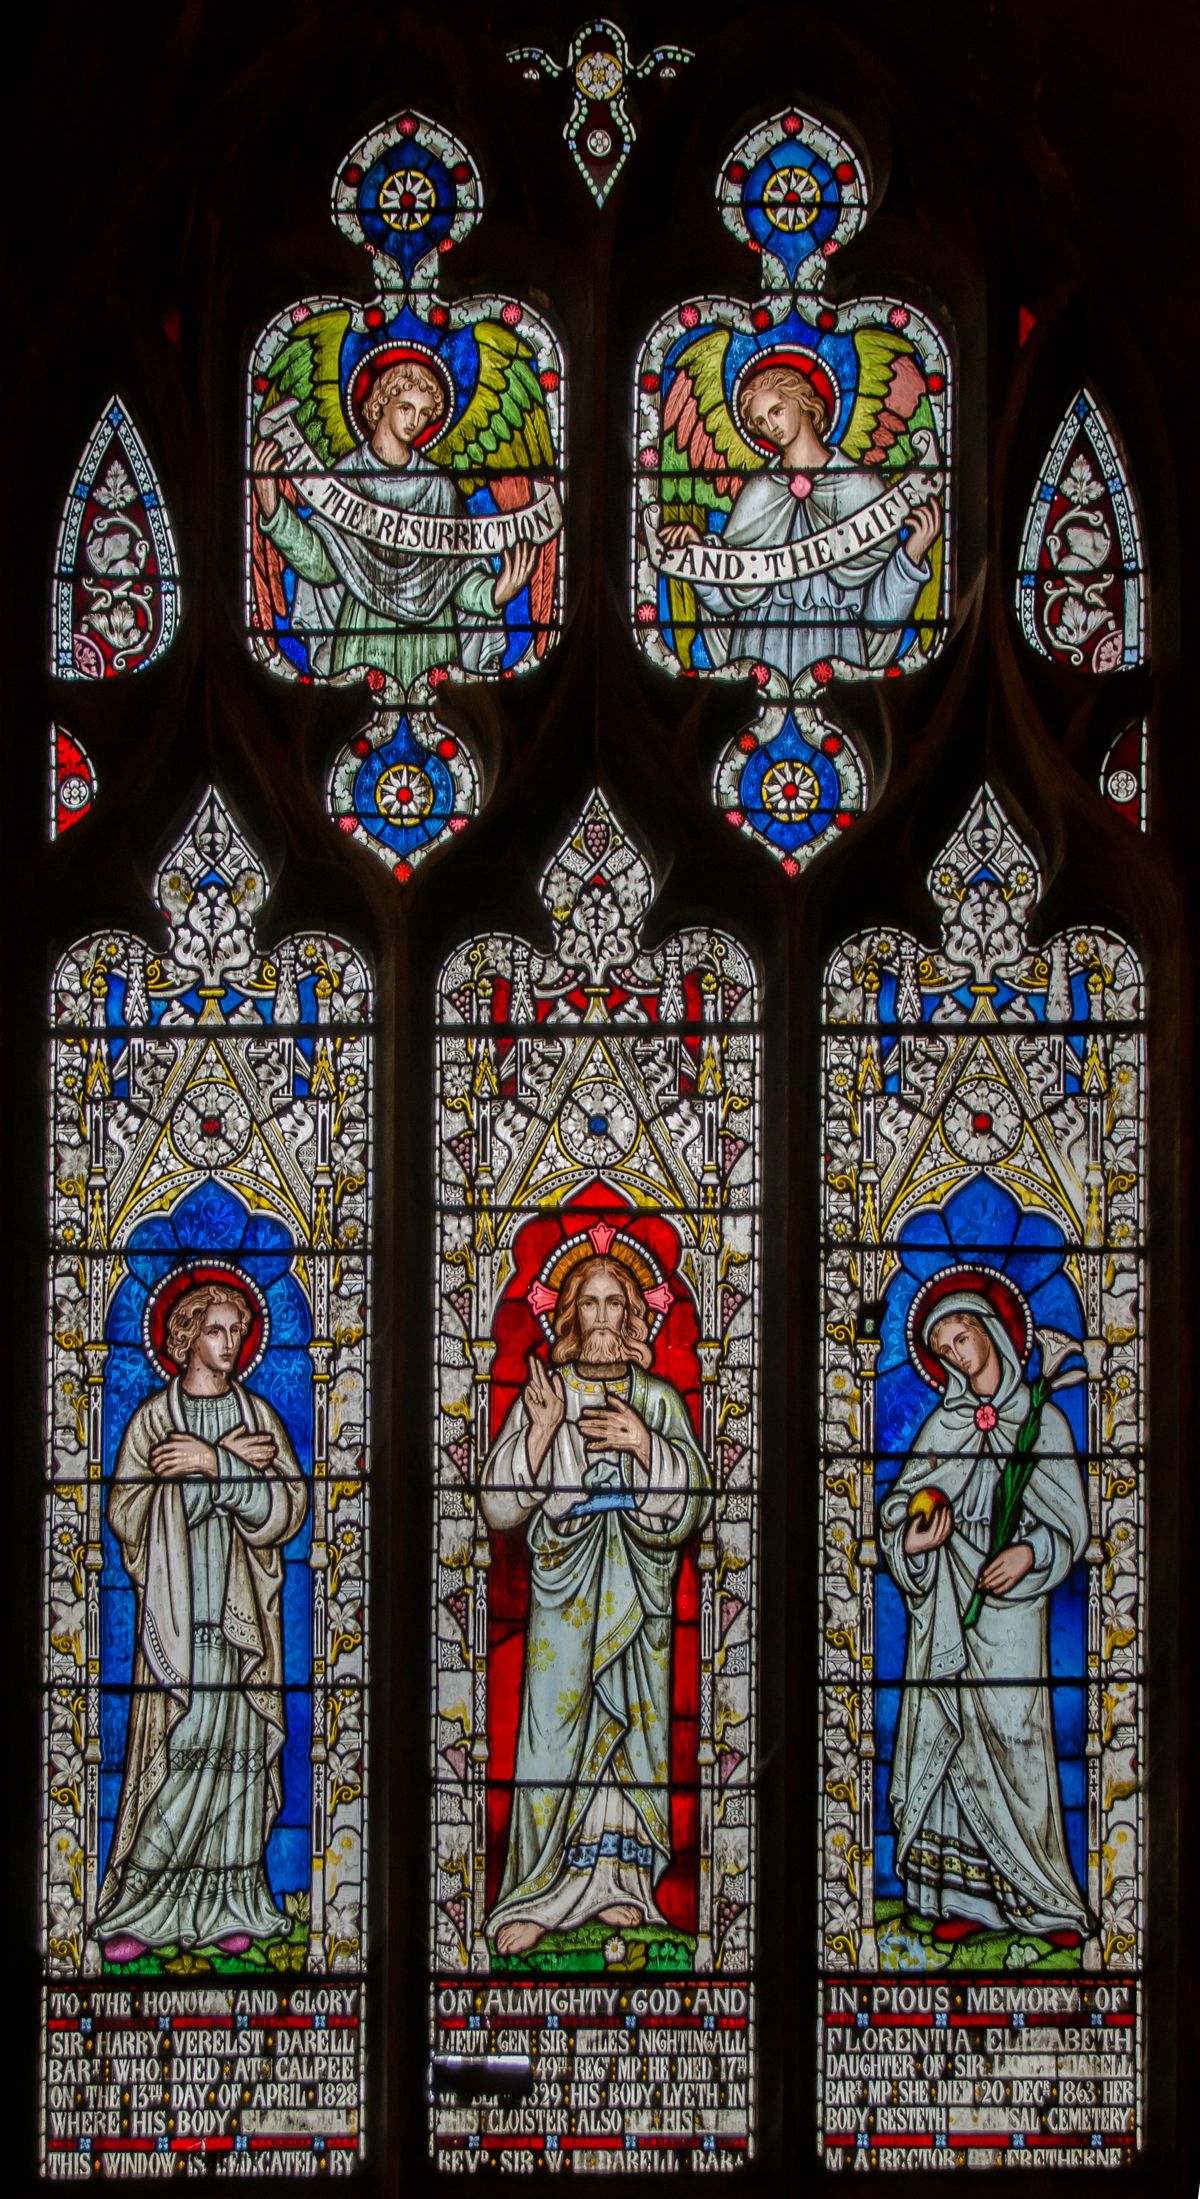 The Risen Jesus Christ, The Virgin Mary, and Saint John the Evangelist Stained Glass Window in Gloucester Cathedral, England (2015) by Jules & Jenny - Catholic Stock Photo